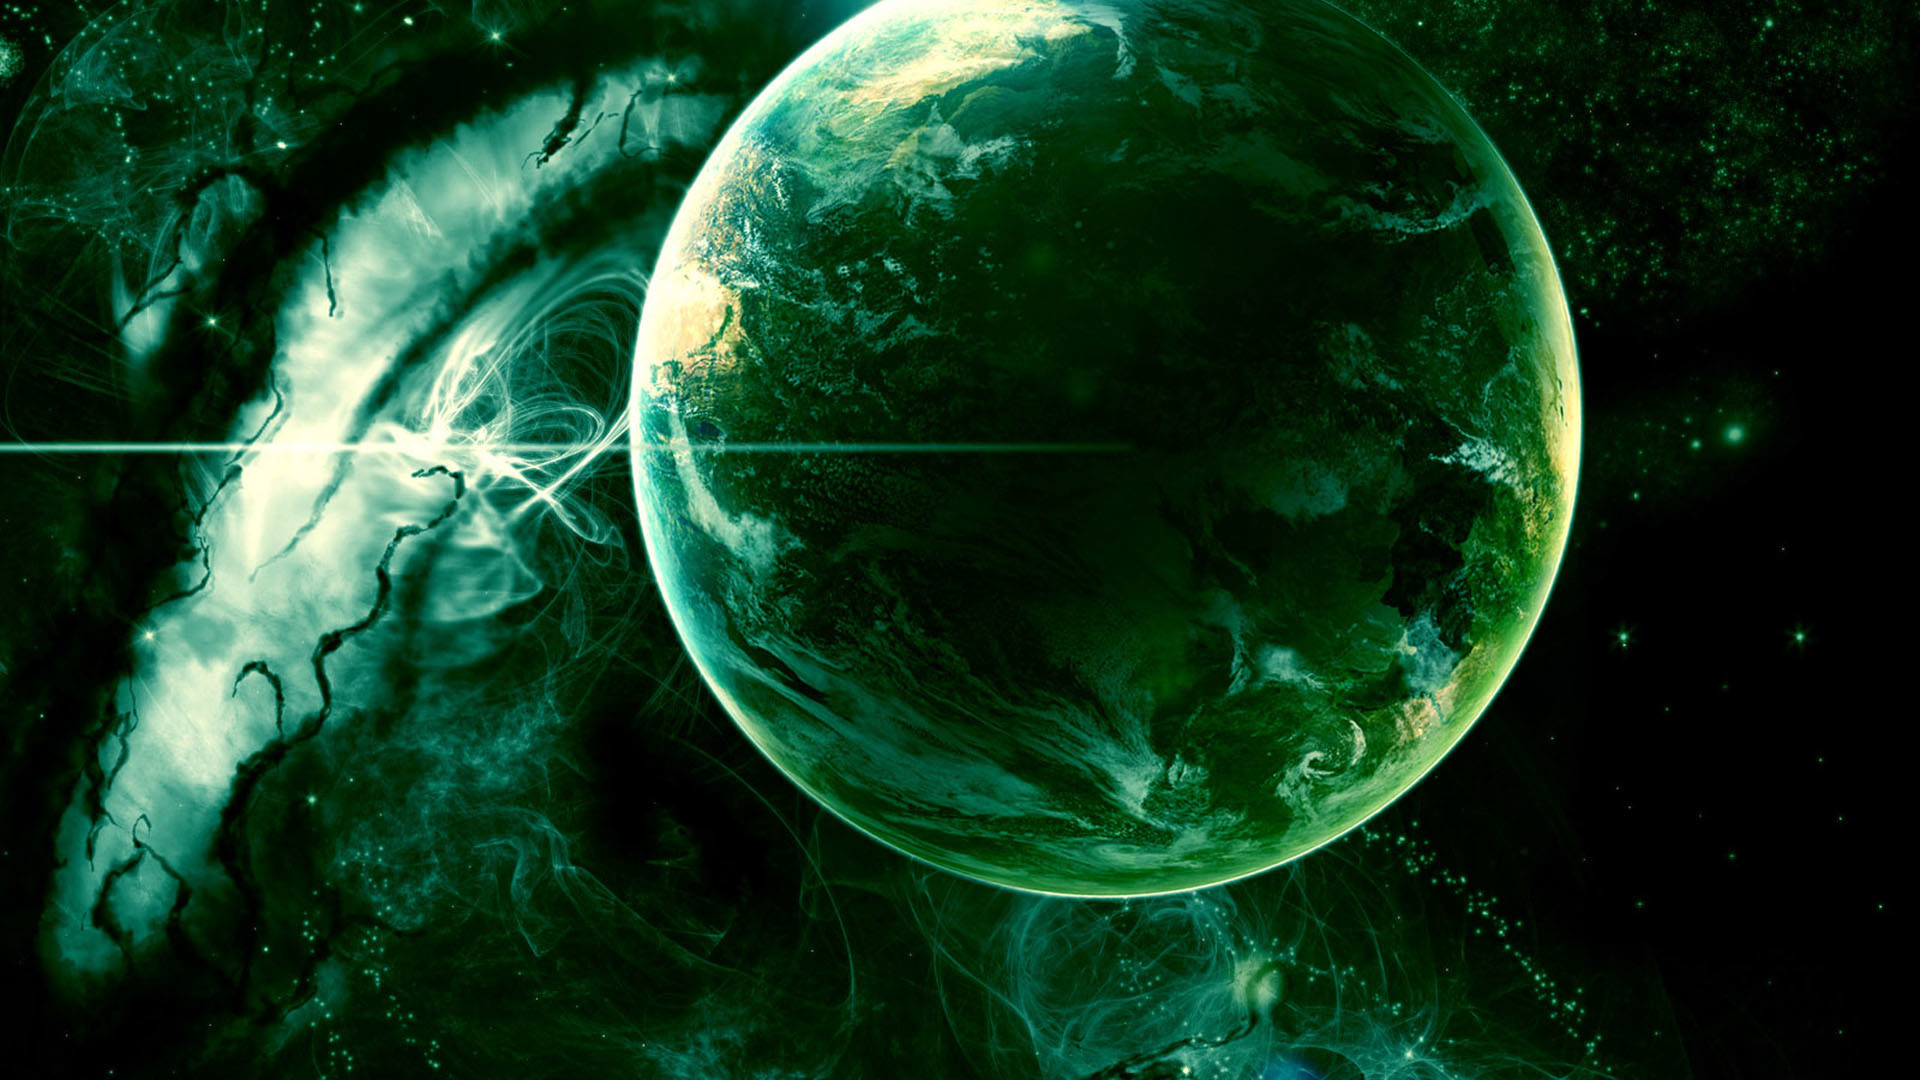 1920x1080, 1080p Space Wallpaper Download Free - Green Space Background 1080p - HD Wallpaper 